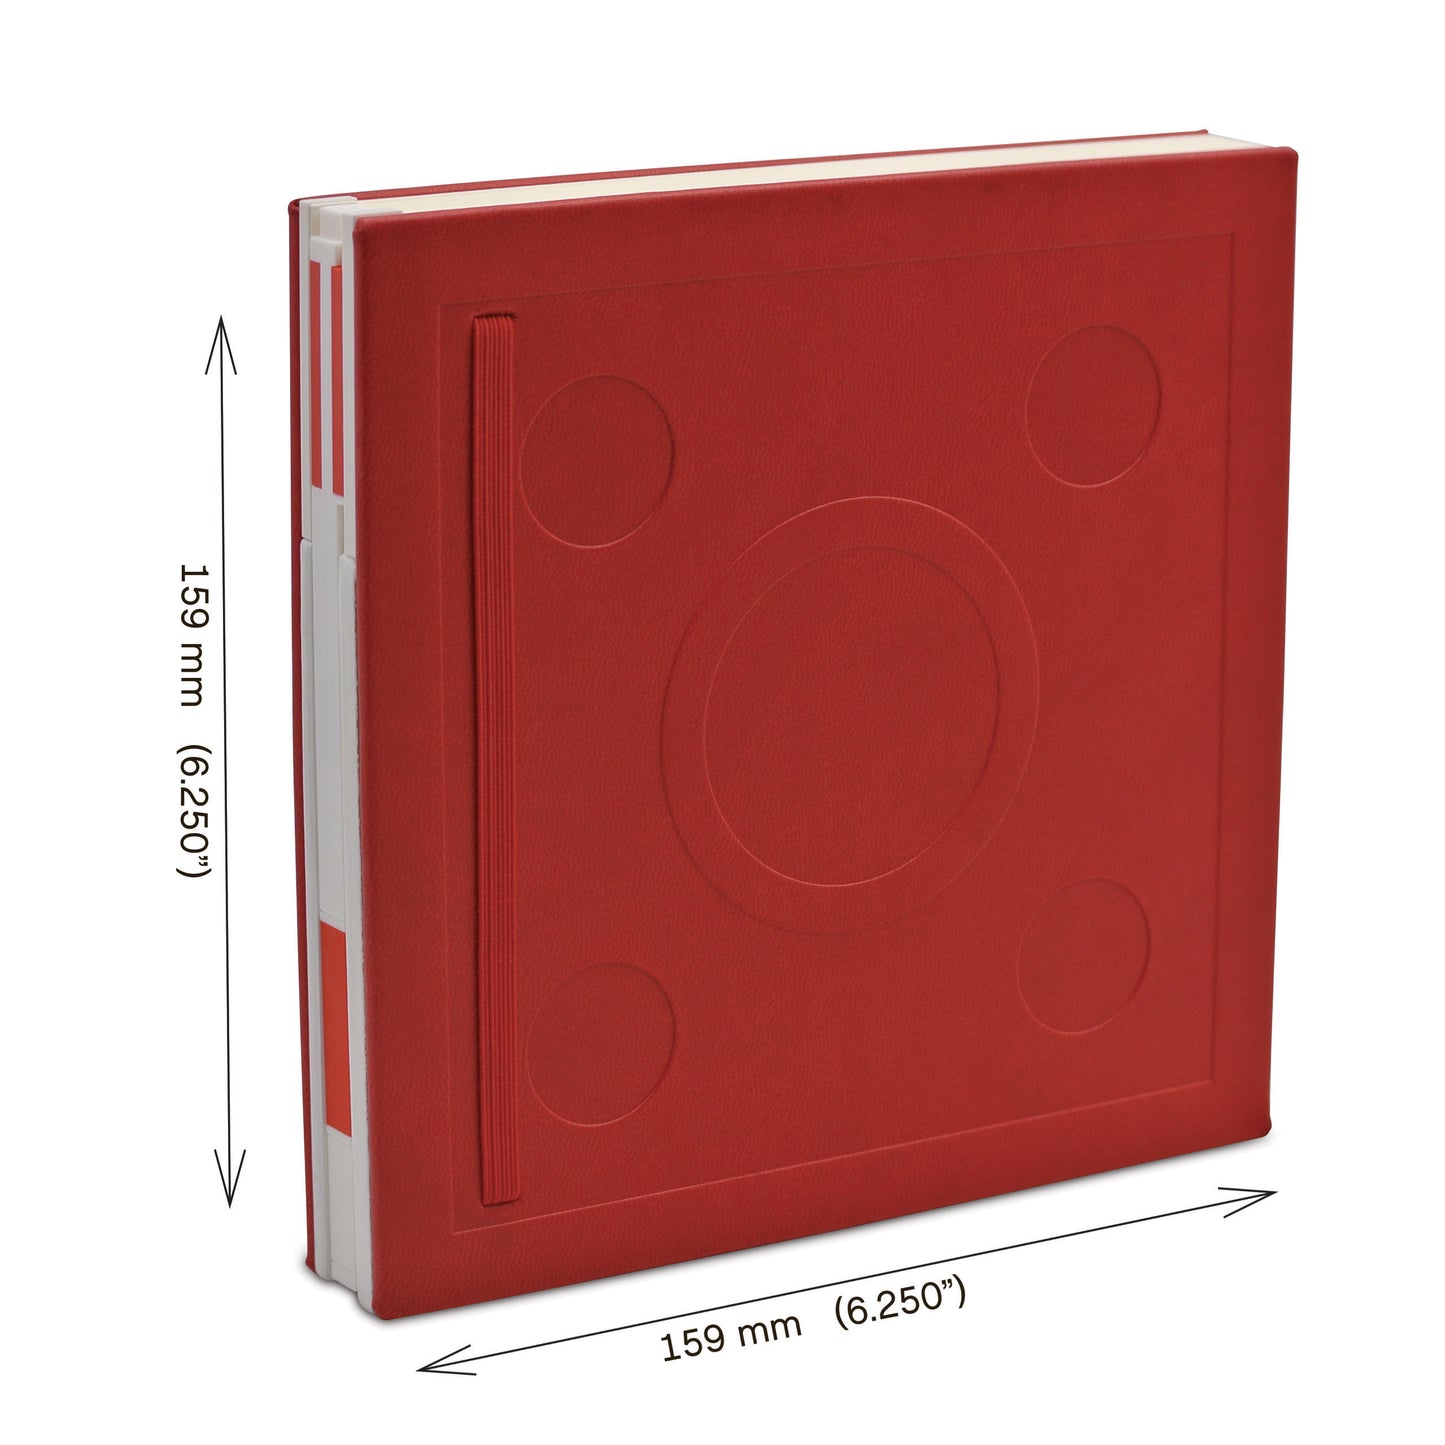 IQ LEGO® 2.0 Stationery Locking Notebook with Color-Matched Gel Pen - Red (52439)